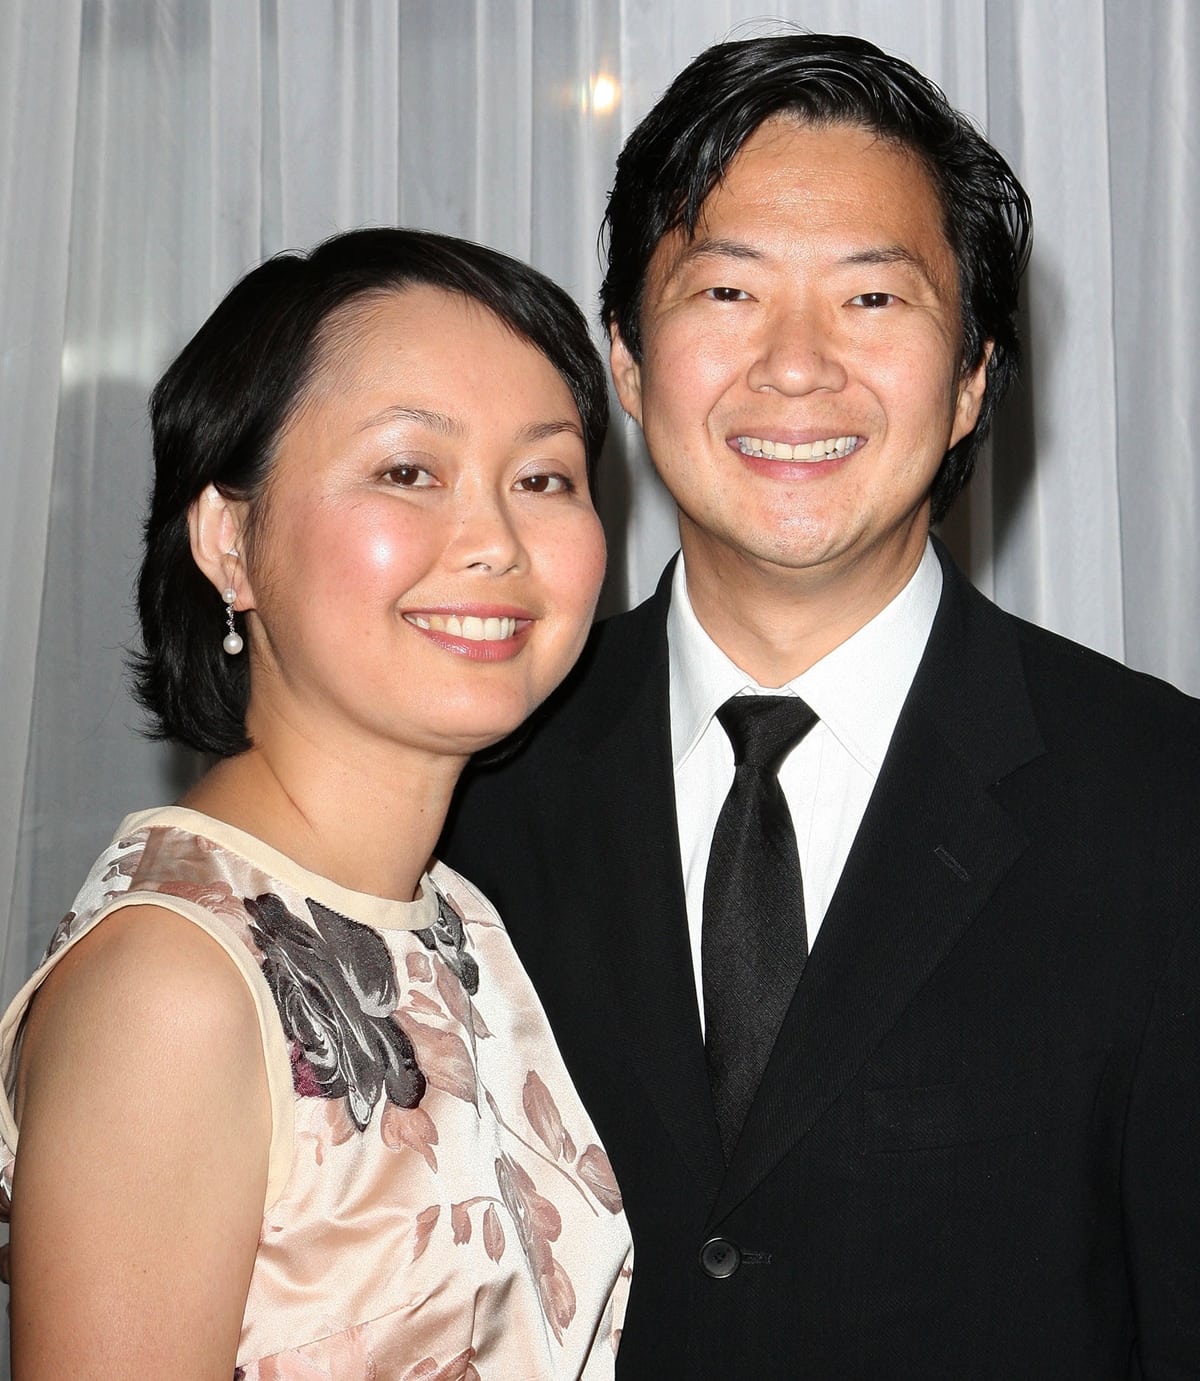 Ken Jeong's wife Tran Ho is a family physician and a breast cancer survivor